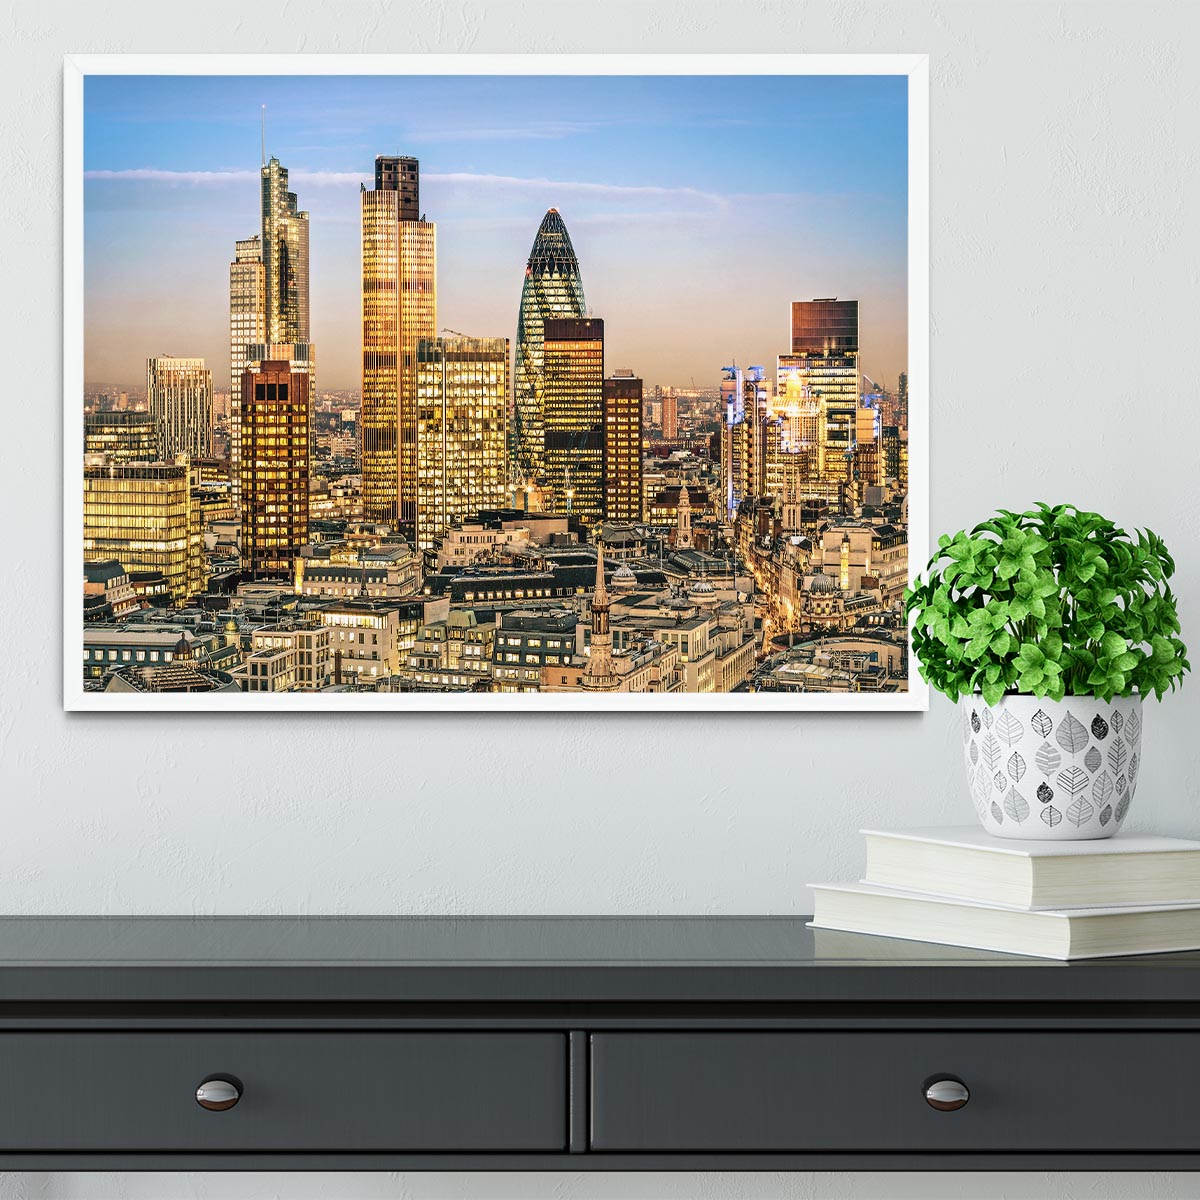 Stock Exchange Tower and Lloyds of London Framed Print - Canvas Art Rocks -6